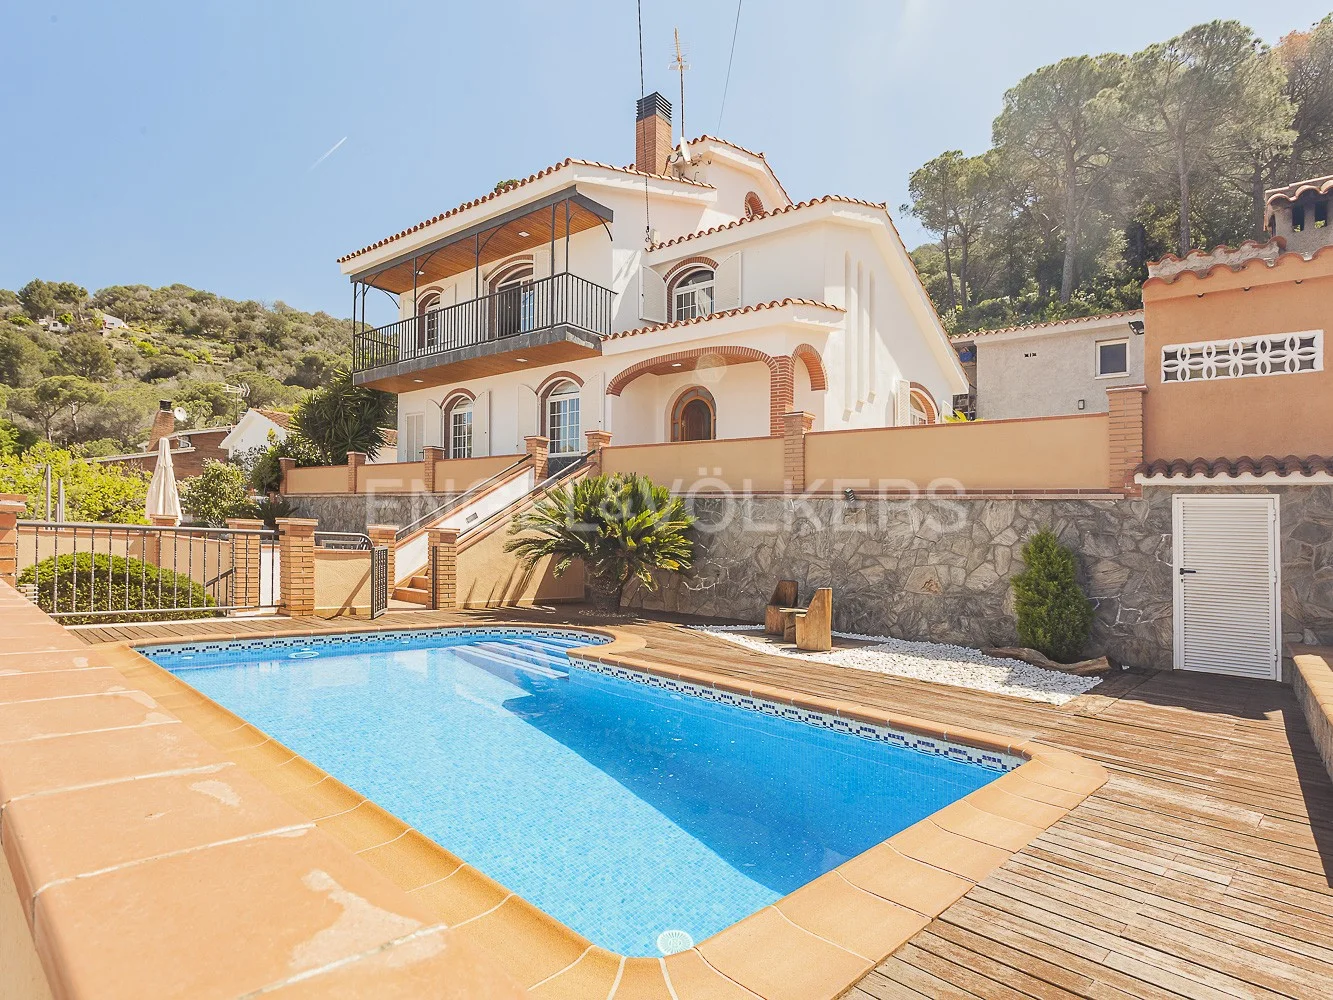 HOUSE WITH MAGNIFICENT VIEWS IN SANT FOST RESIDENCIAL